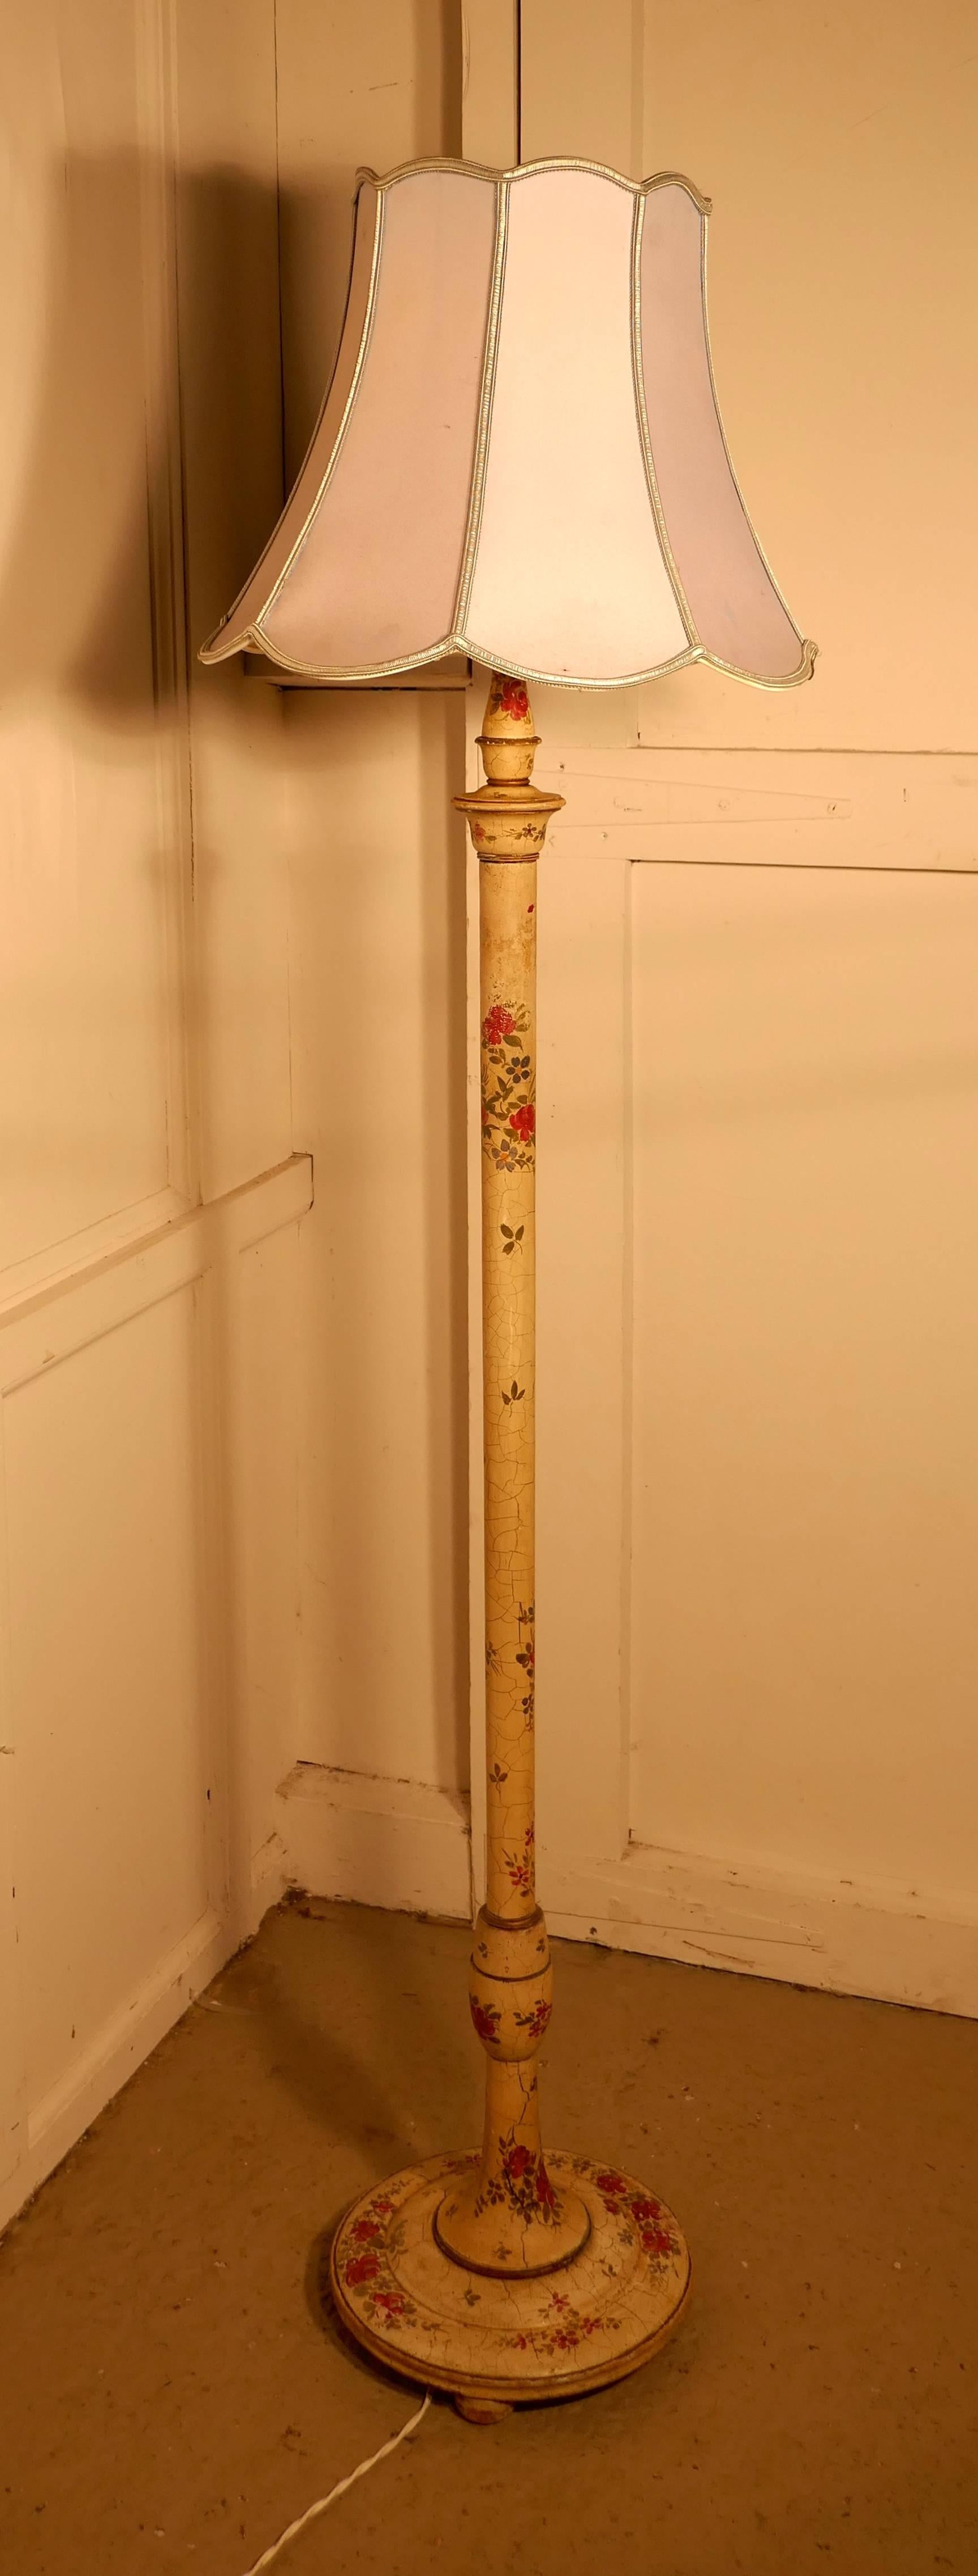 Cold-Painted 1920s Painted Floor Standing Lamp, Cream Red Roses Shabby Crackle Glazed Finish